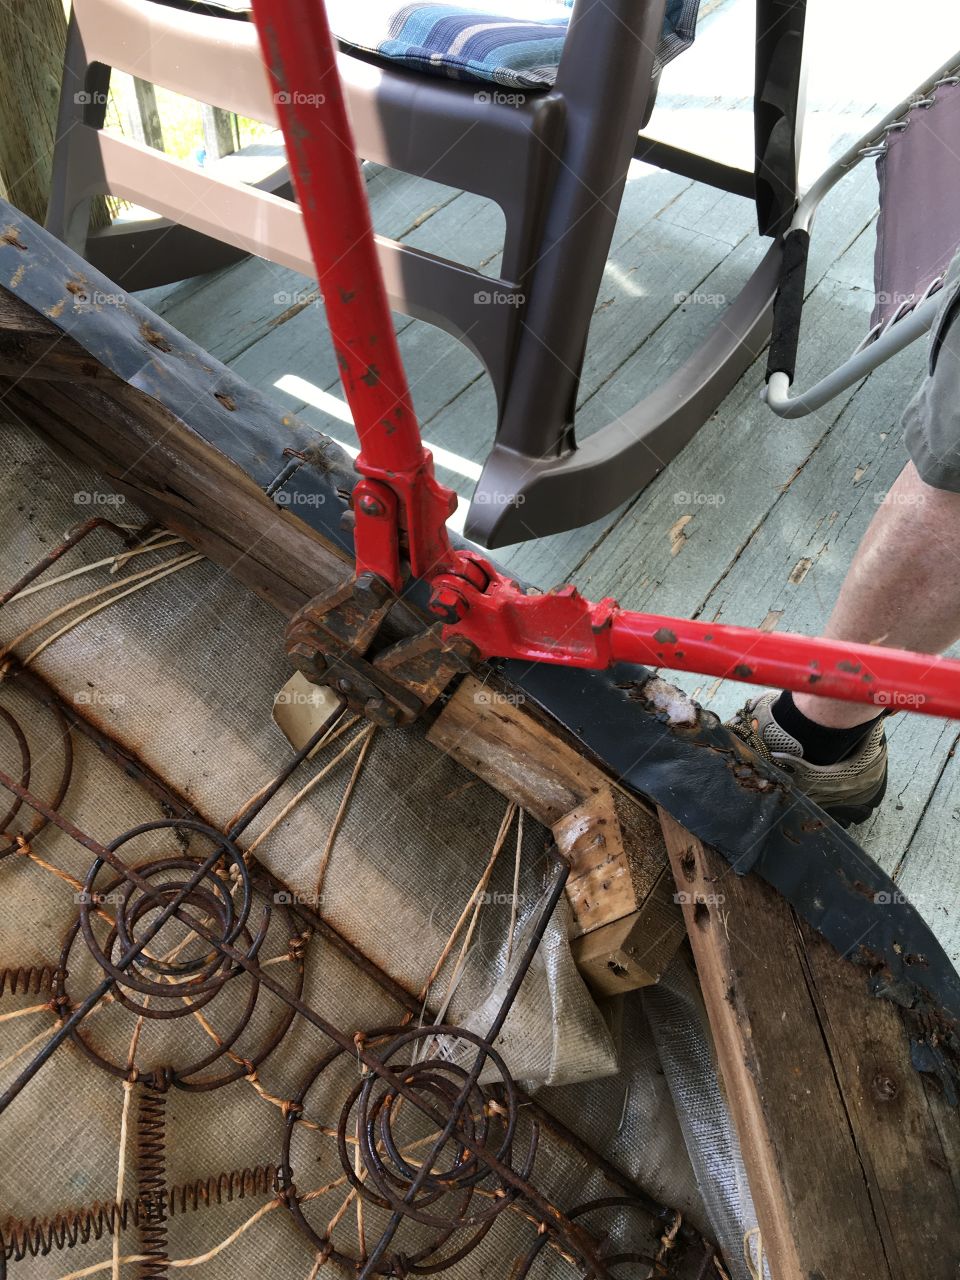 Red bolt cutters taking apart old couch.